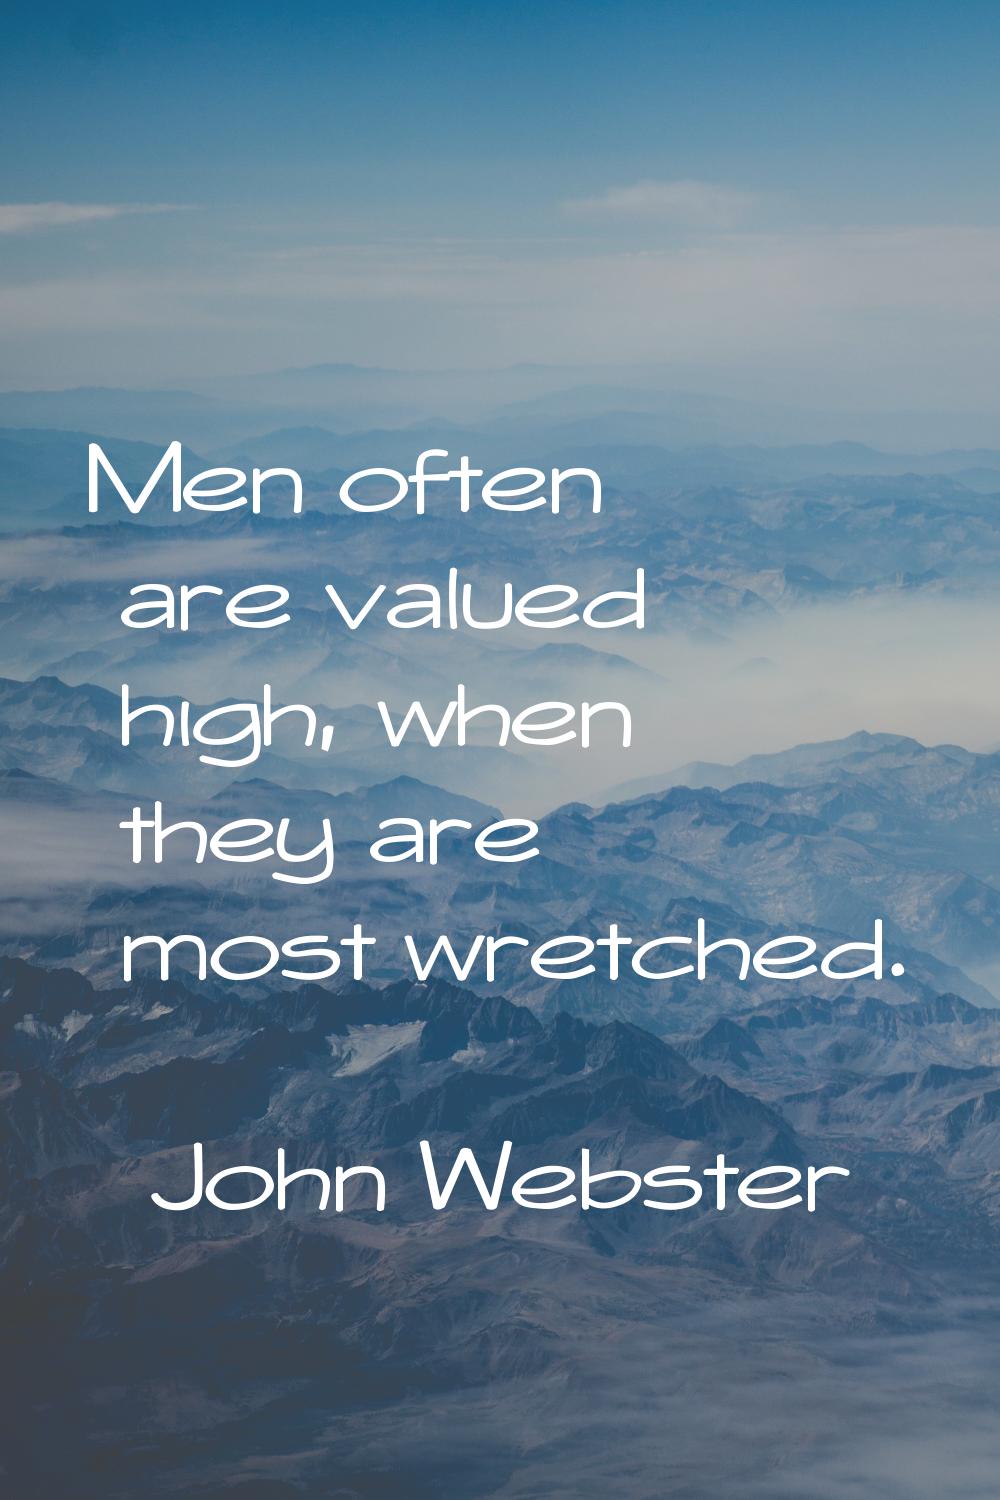 Men often are valued high, when they are most wretched.